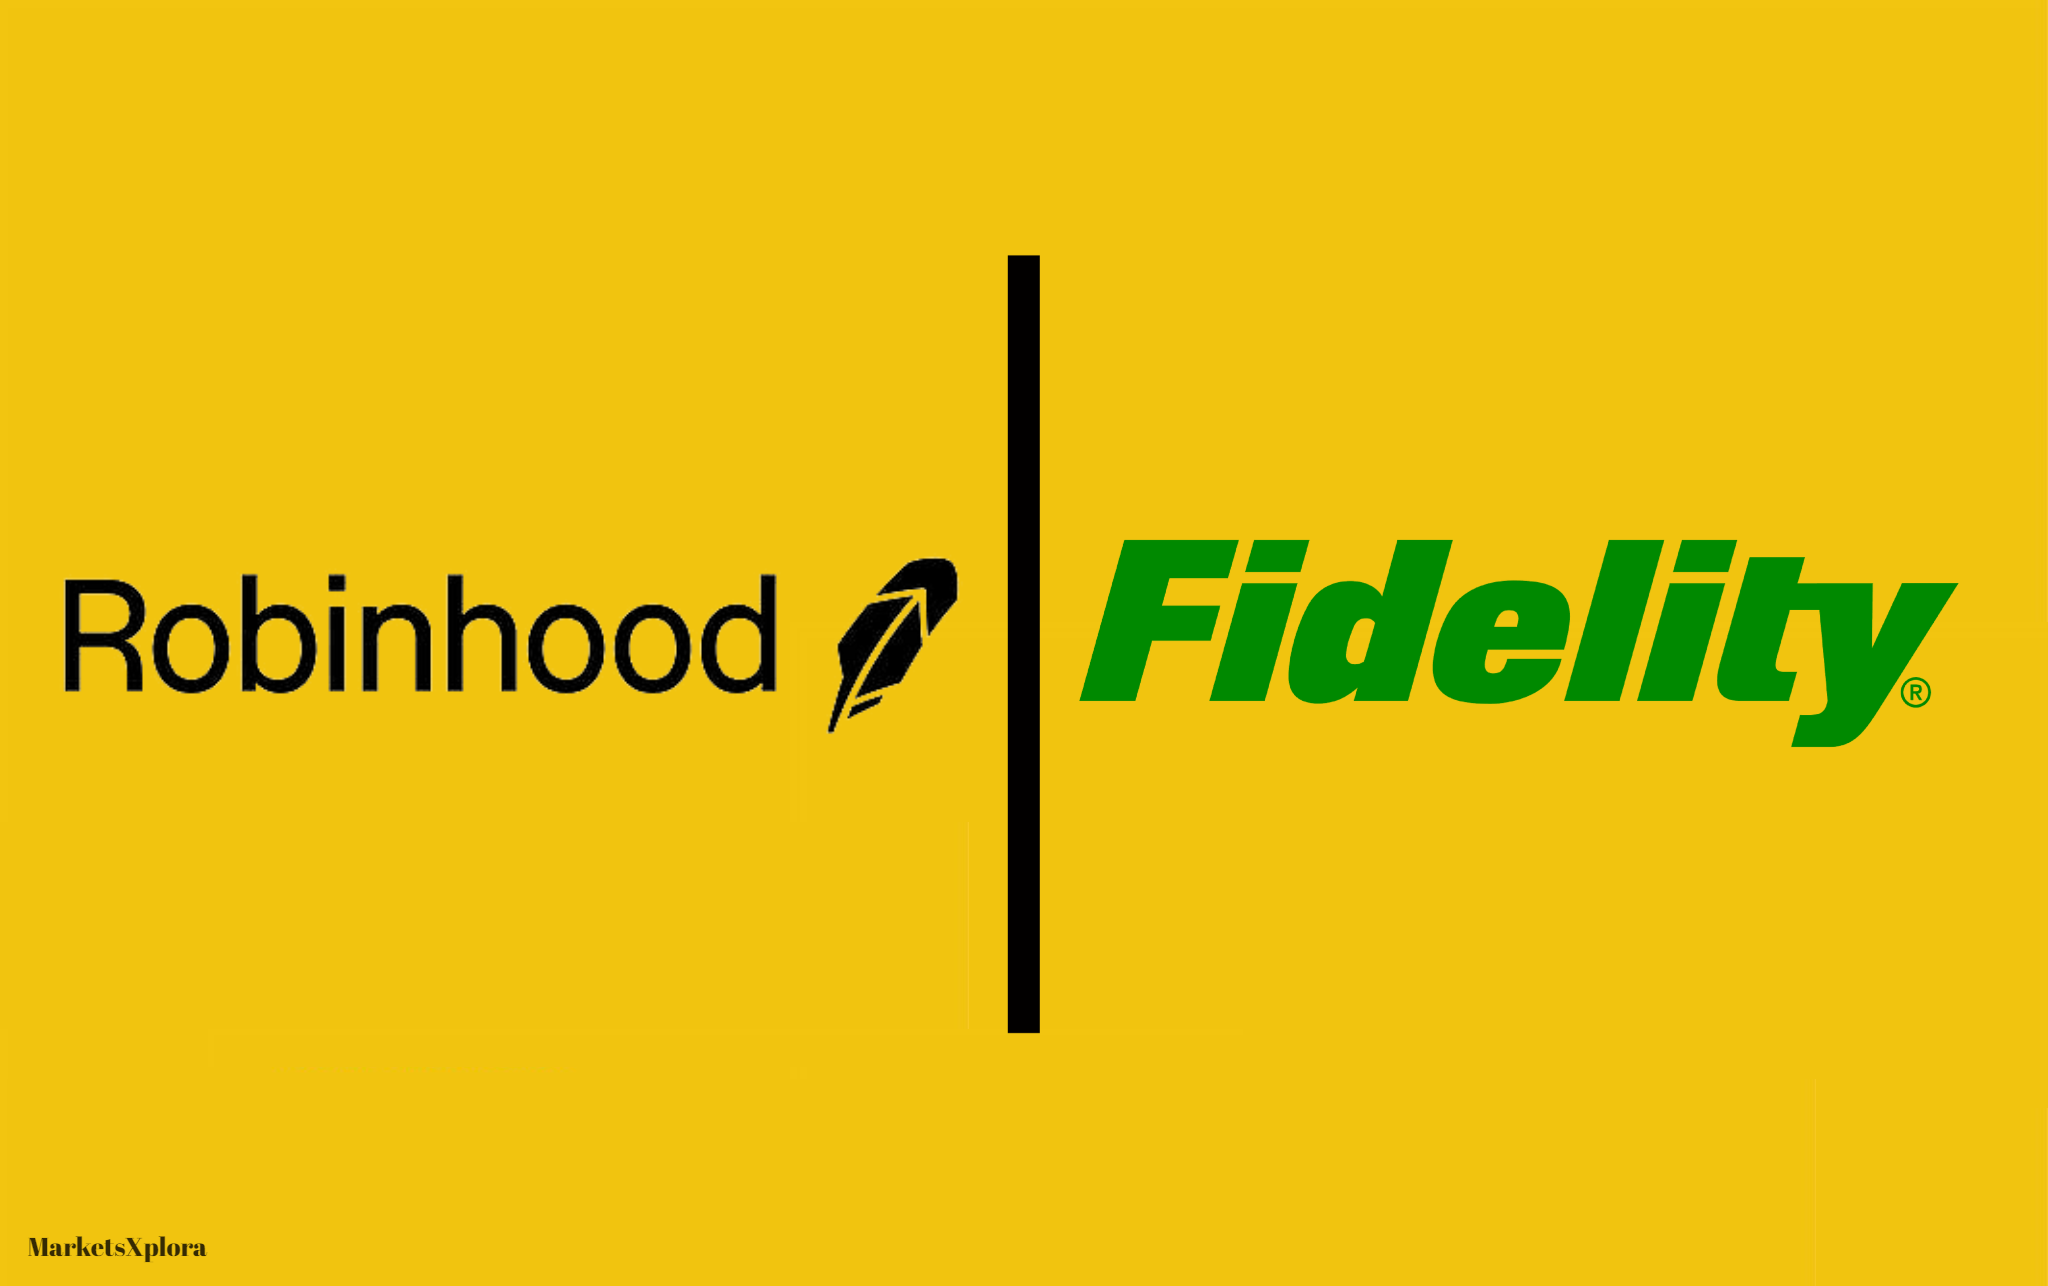 Robinhood vs Fidelity: Where should you invest? Our epic guide evaluates usability, product selections, advisory services and pricing.